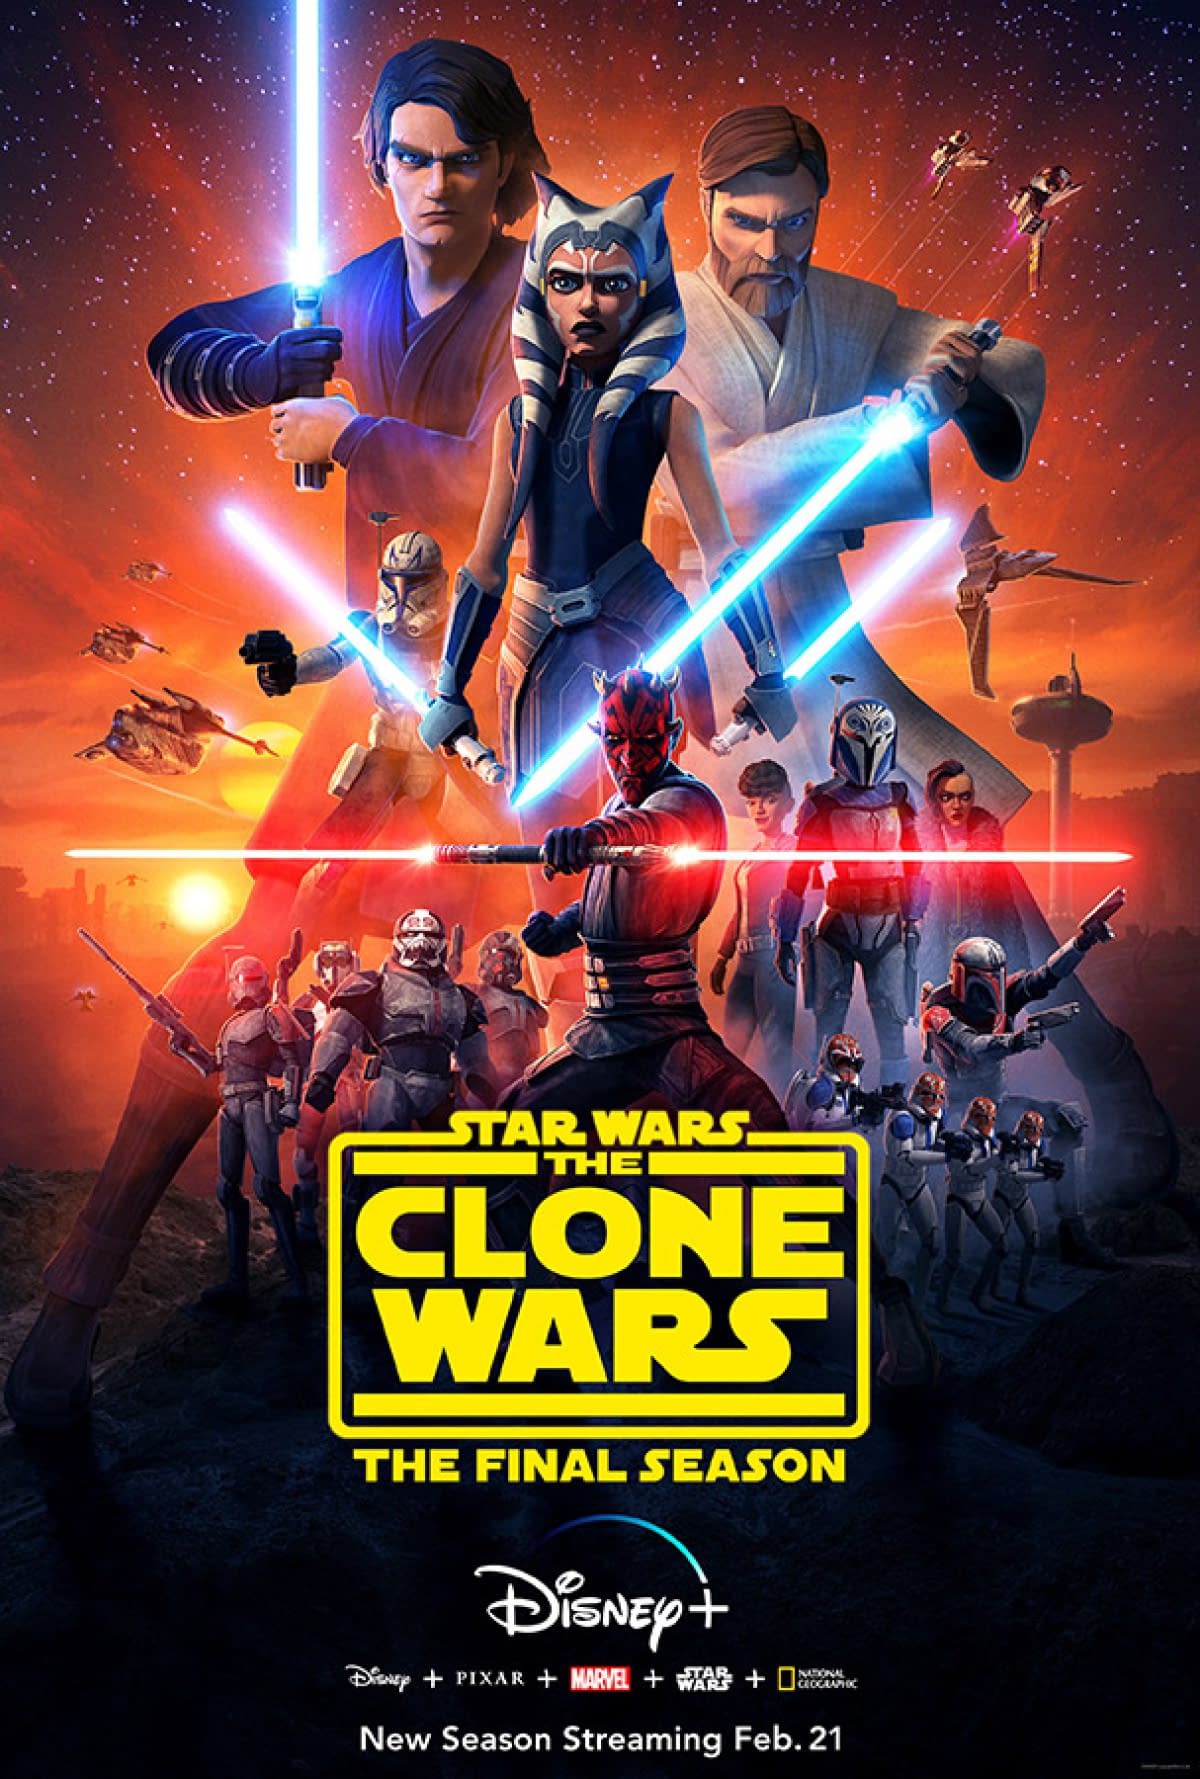 "Star Wars: The Clone Wars" Season 7 Episode 1 - "The Bad Batch" Echoes The Past [SPOILER REVIEW]